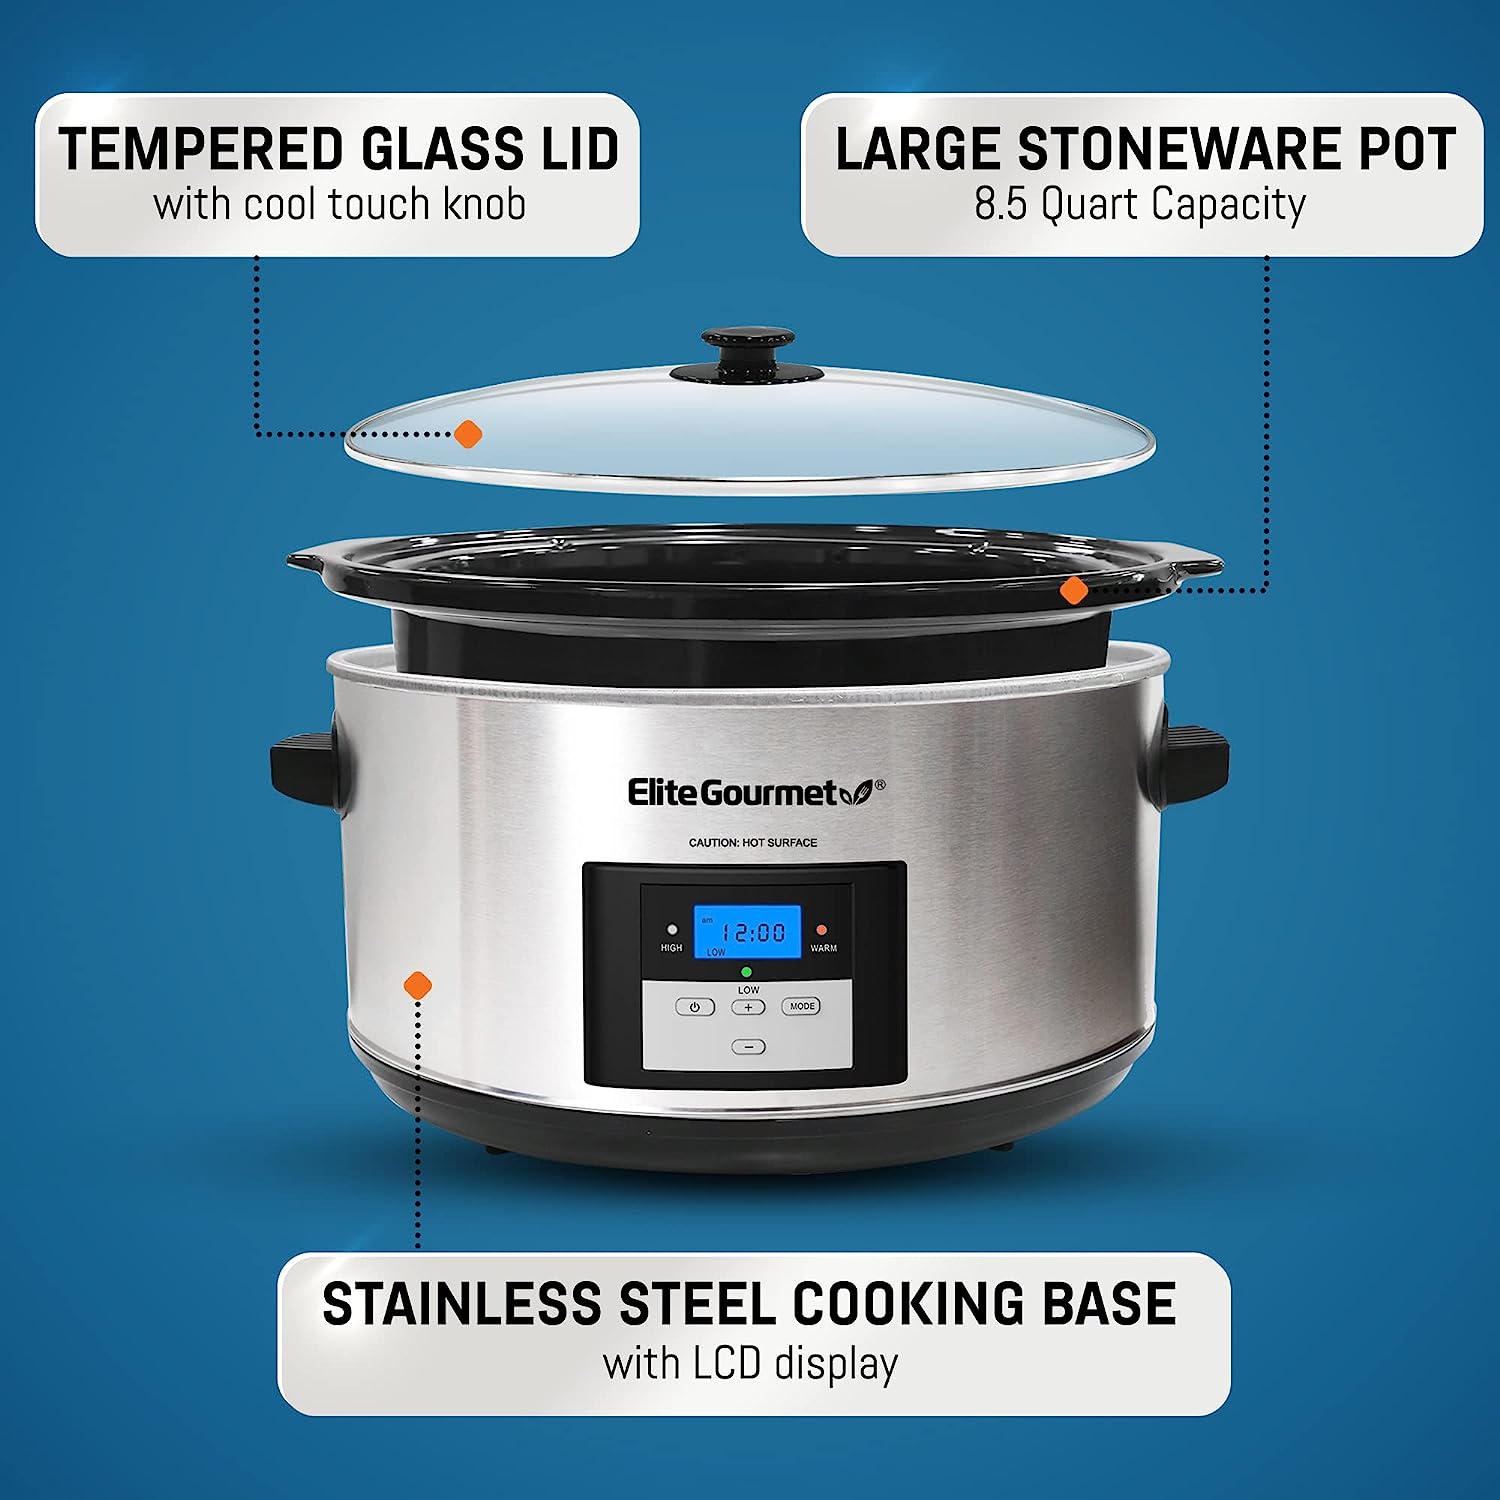  Elite Gourmet Stainless Steel Slow Cooker, Dishwasher-Safe with  Tempered Glass Lid, Cool-Touch Handles, Removable Stoneware Pot, 8.5 Quart,MST-900V:  Crock Pot: Home & Kitchen